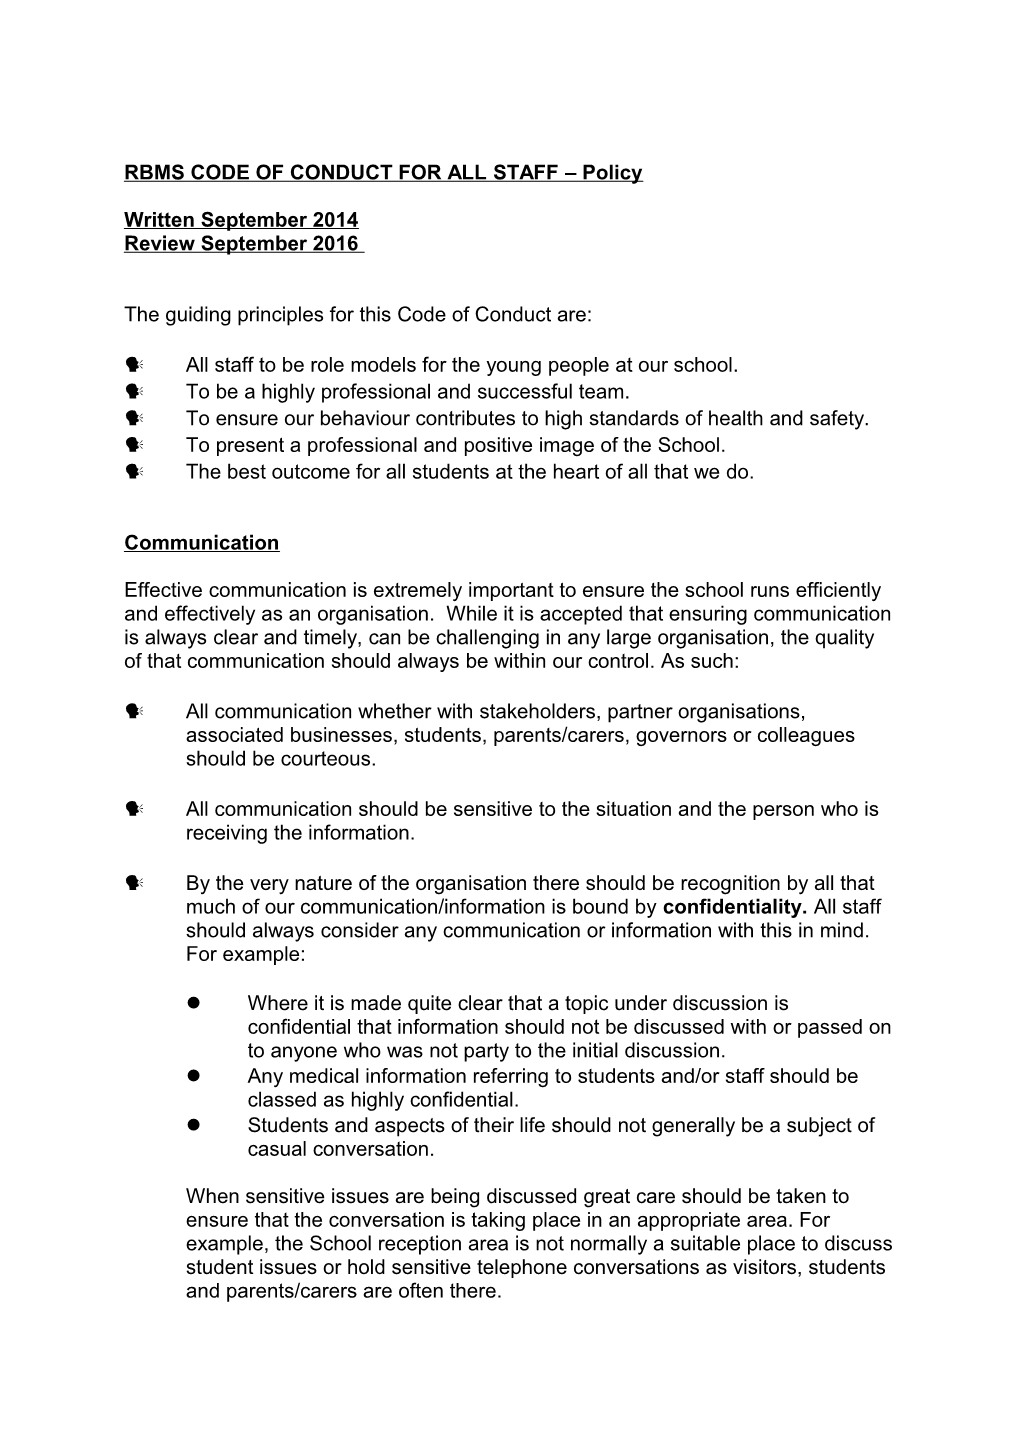 RBMS CODE of CONDUCT for ALL STAFF Policy